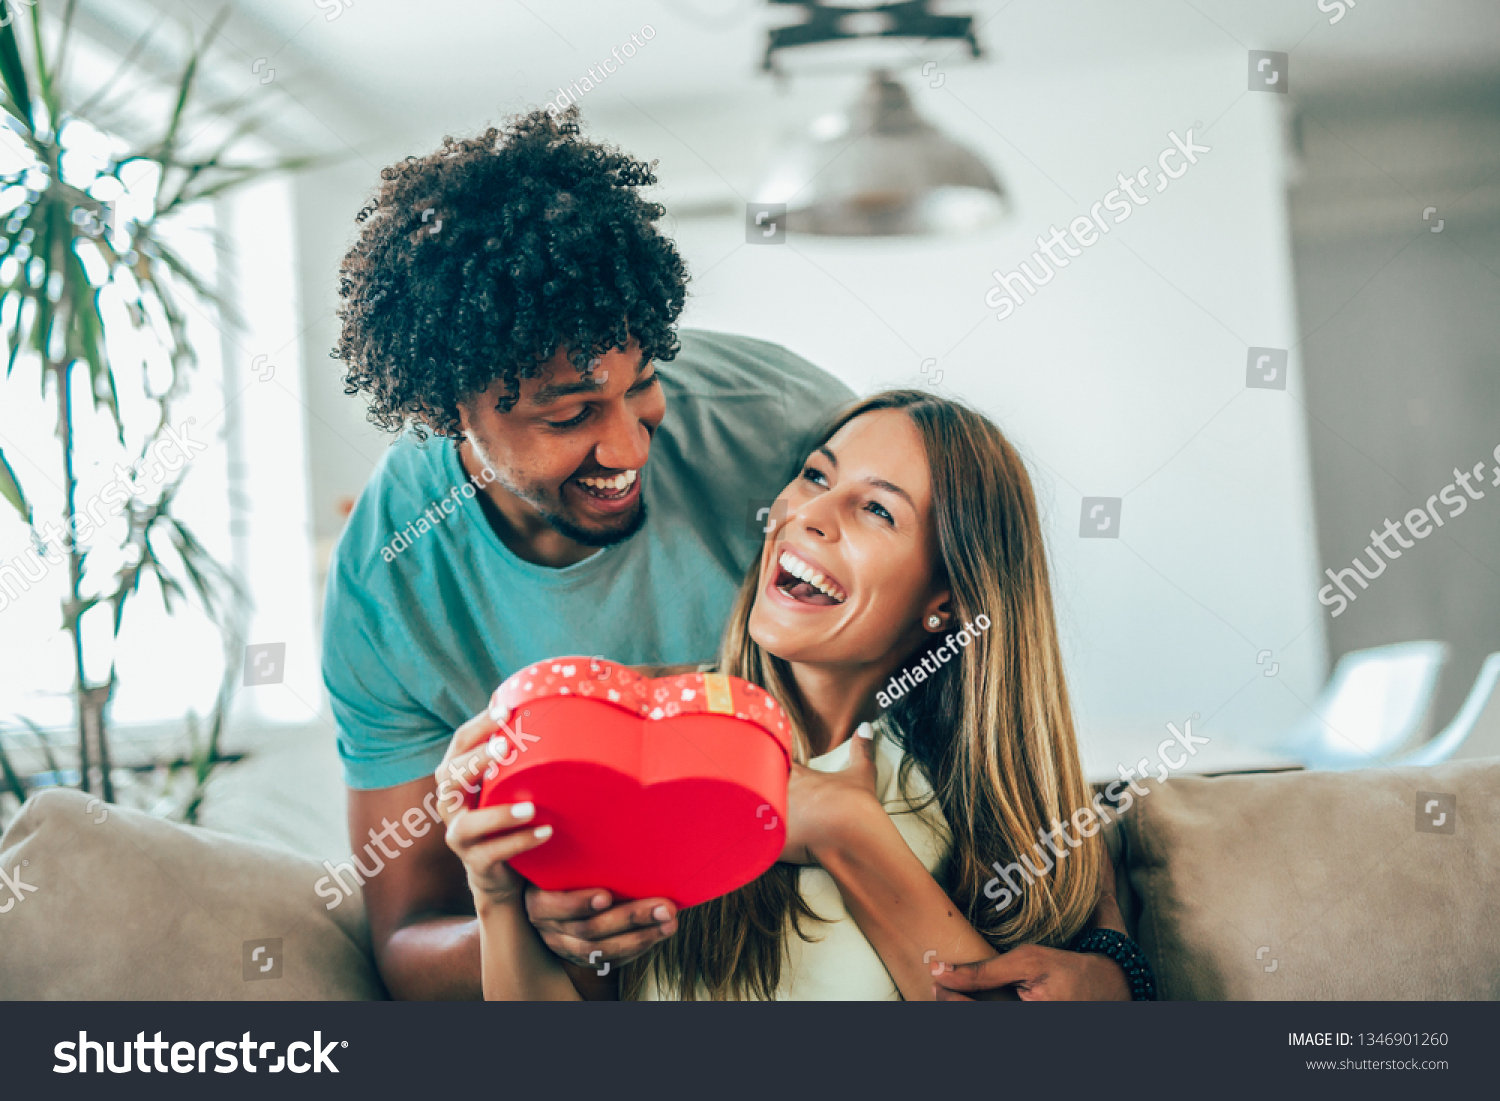 Man giving a surprise gift to woman at home #1346901260